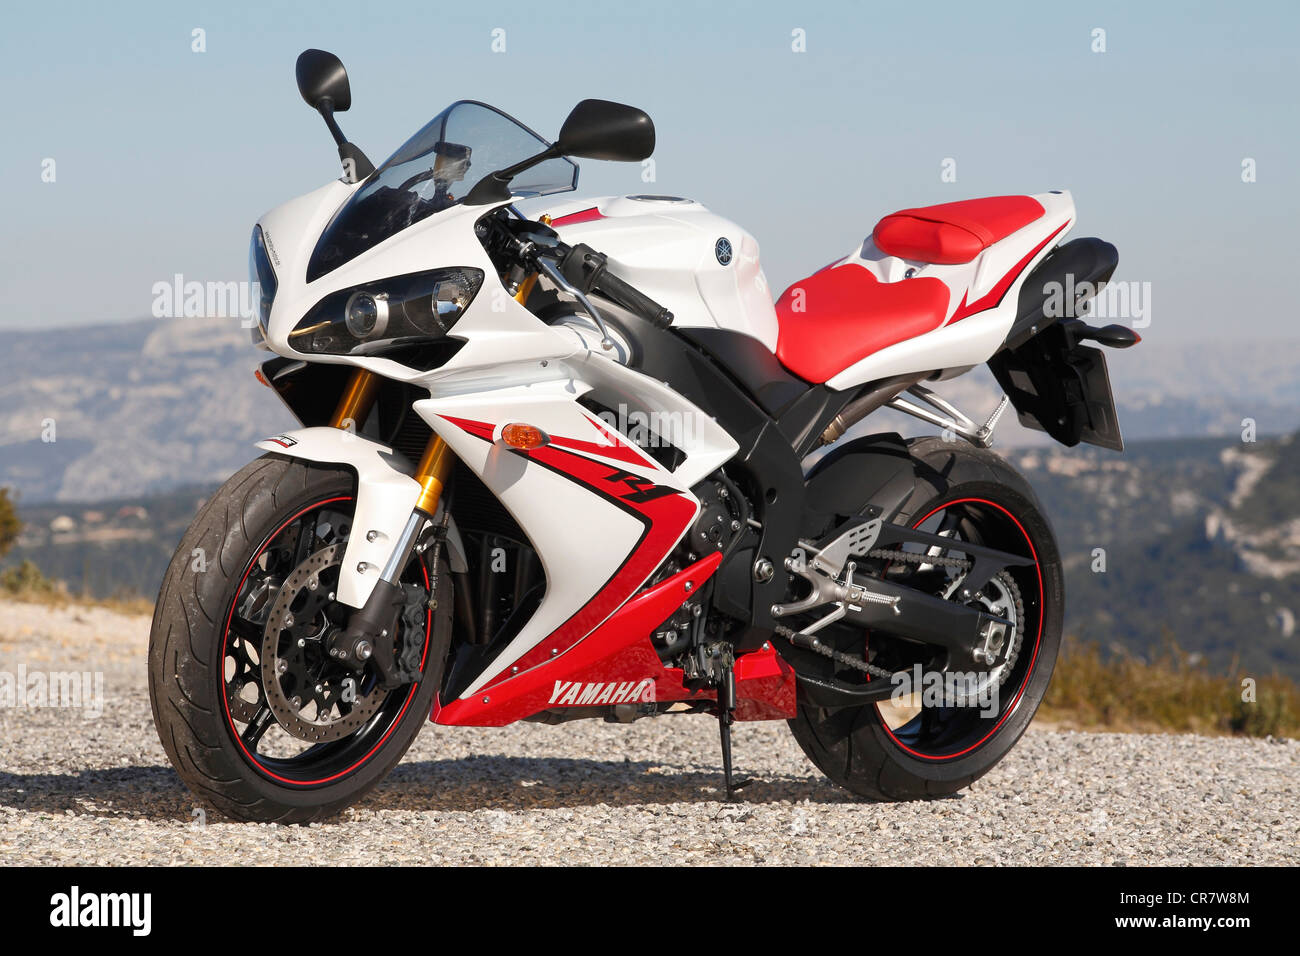 YZF R1 motorcycle Stock - Alamy